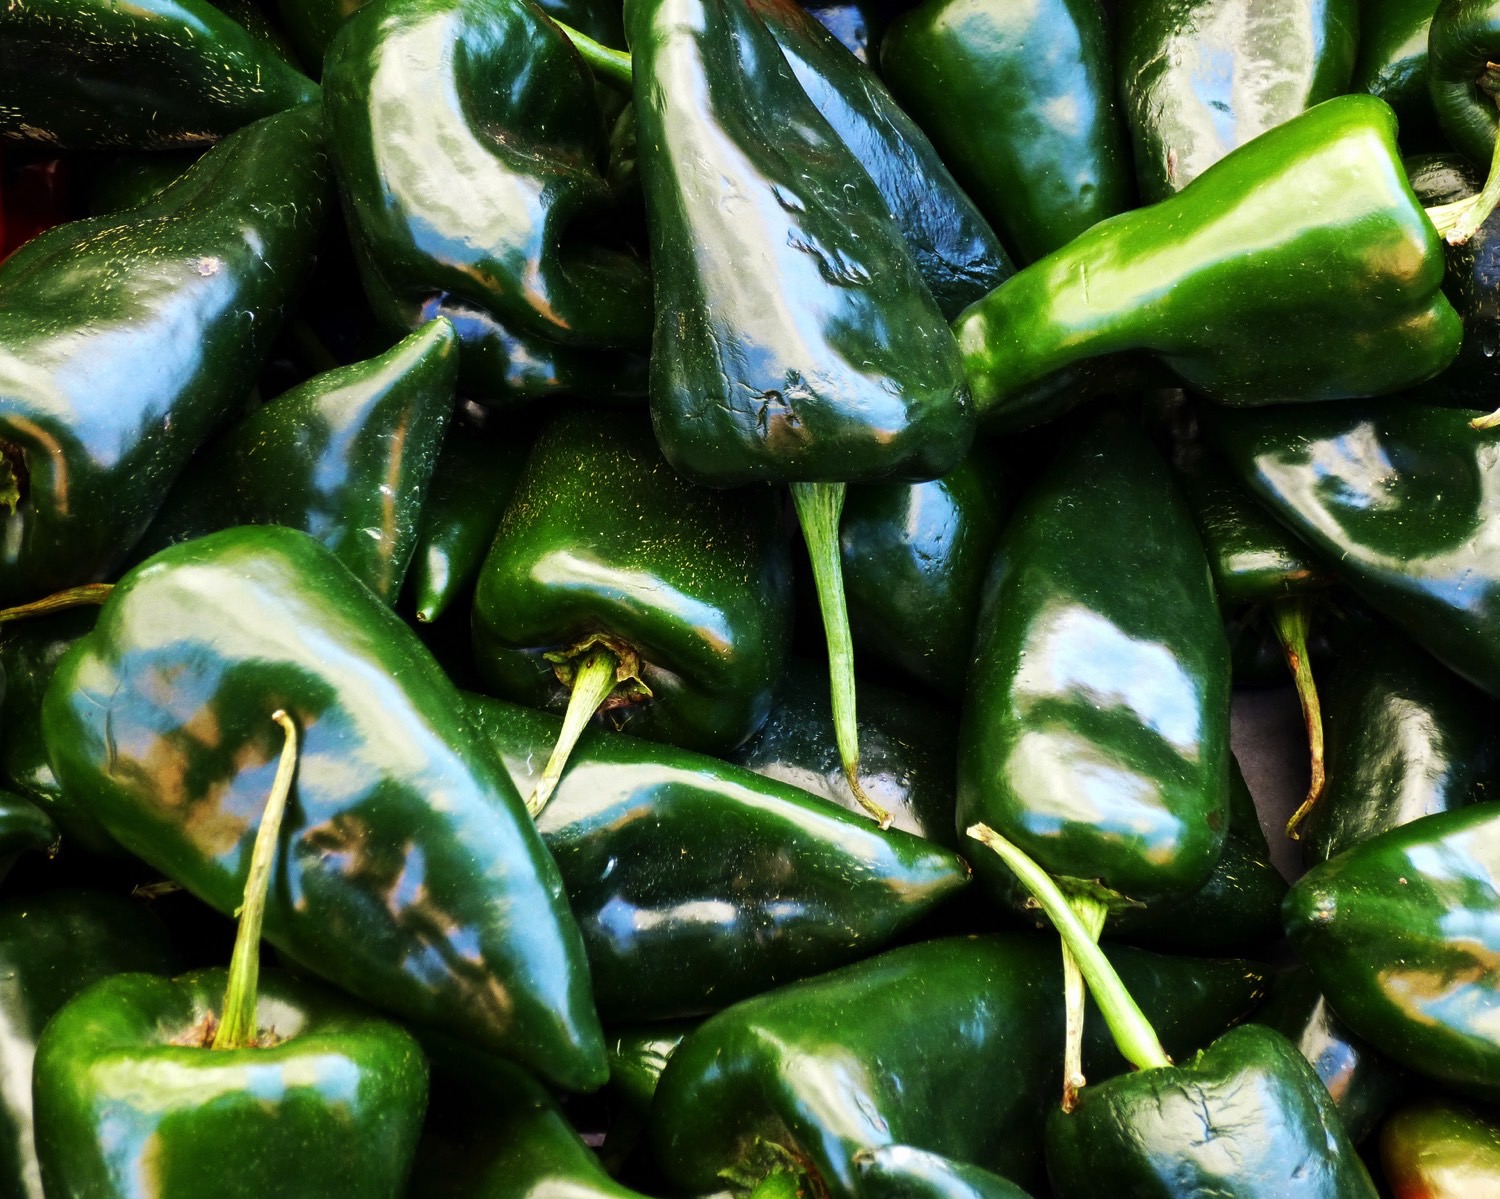 This recipe for roasted poblano peppers stuffed with polenta comes from che...